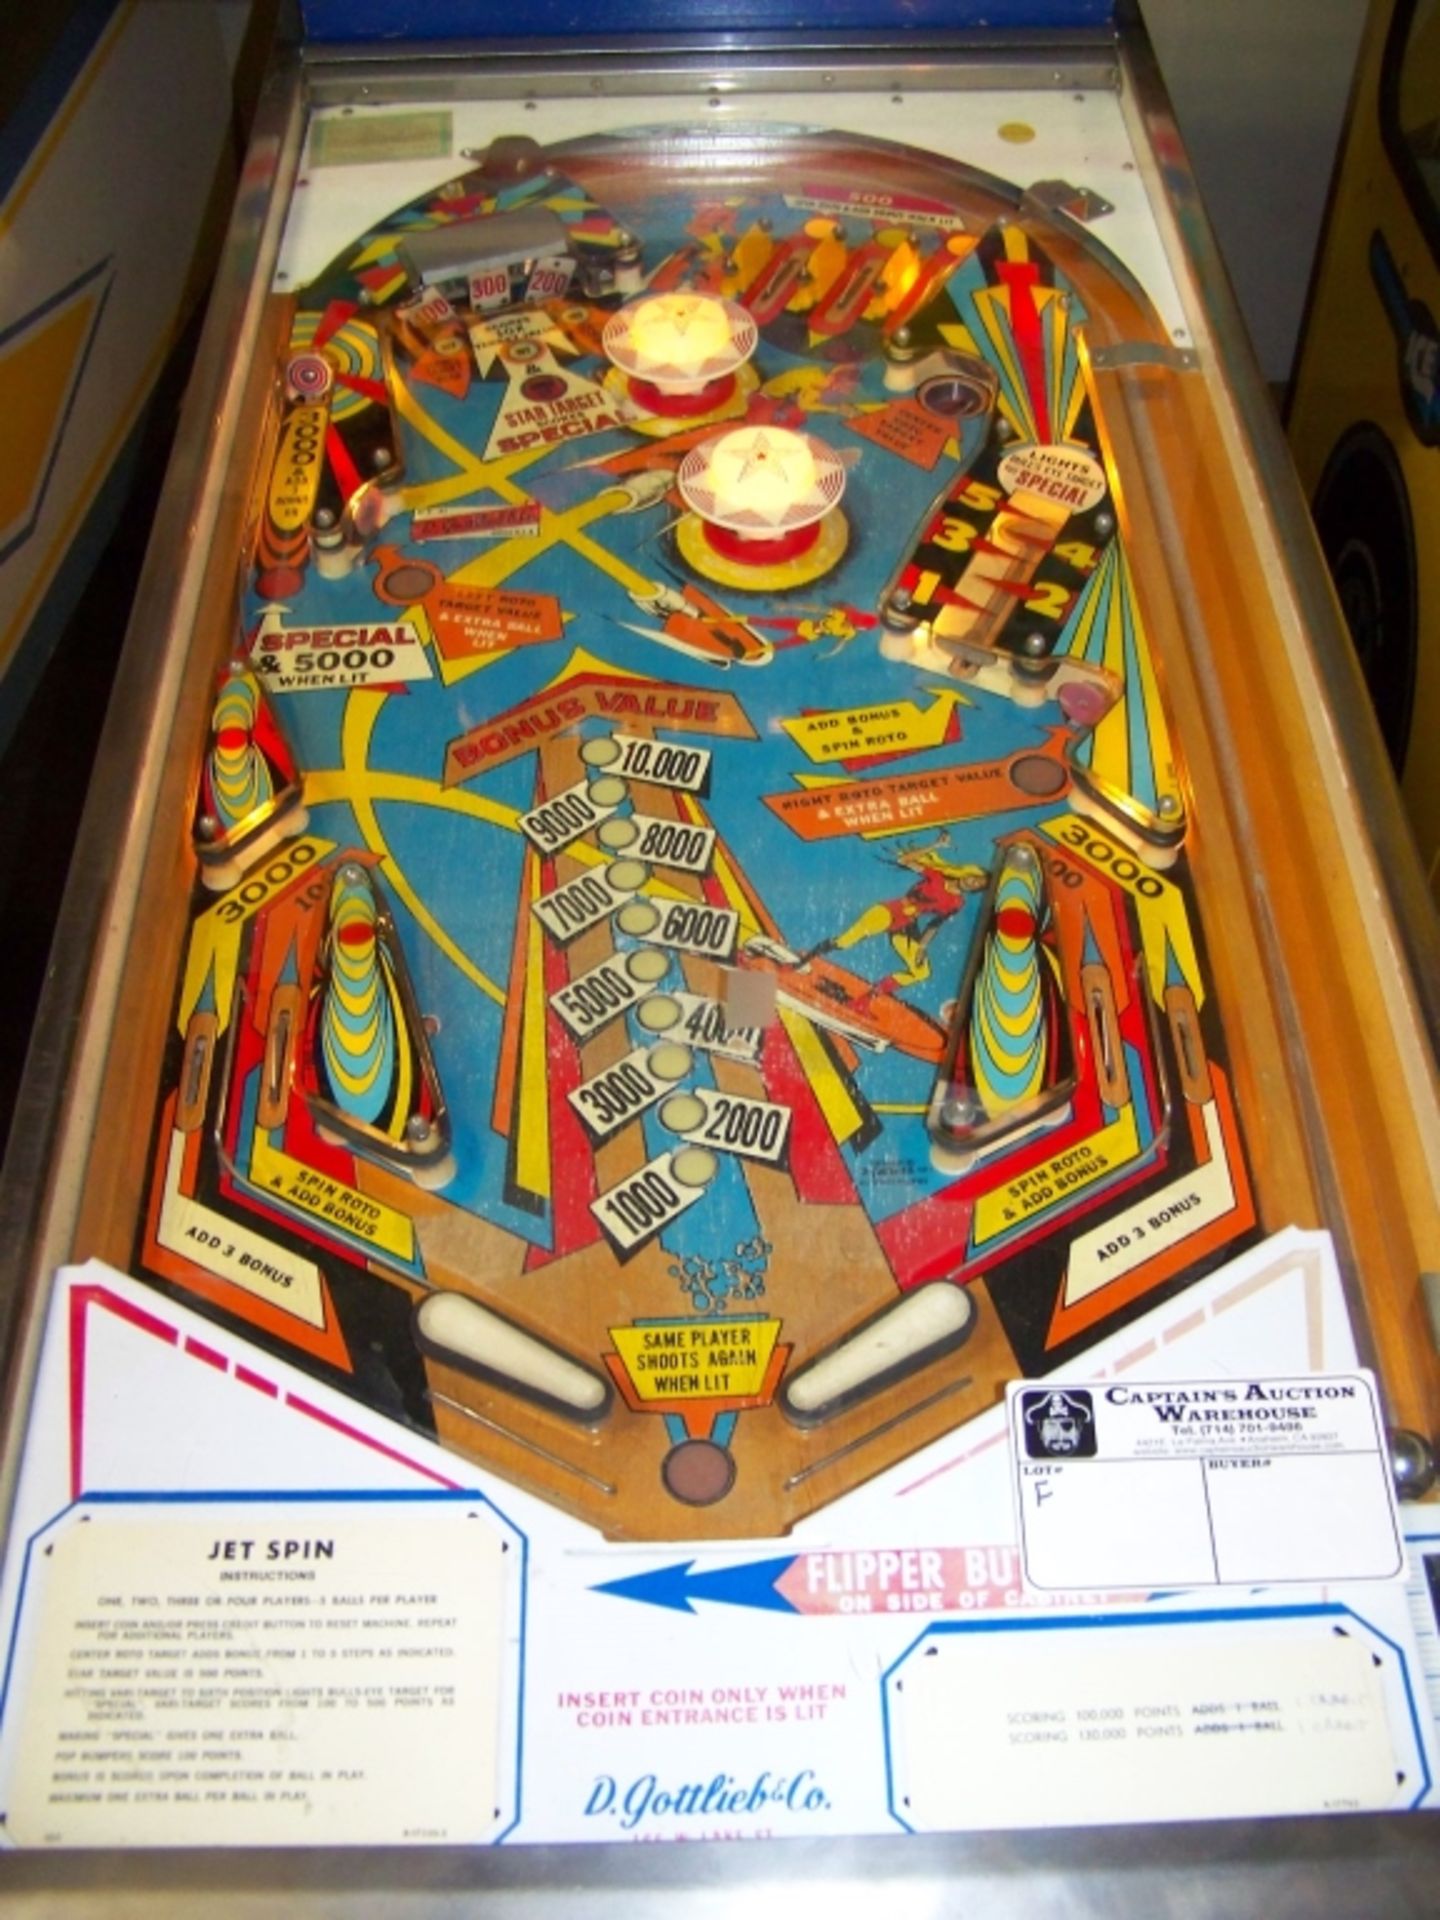 JET SPIN PINBALL MACHINE GOTTLIEB 1977 Item is in used condition. Evidence of wear and commercial - Image 4 of 8